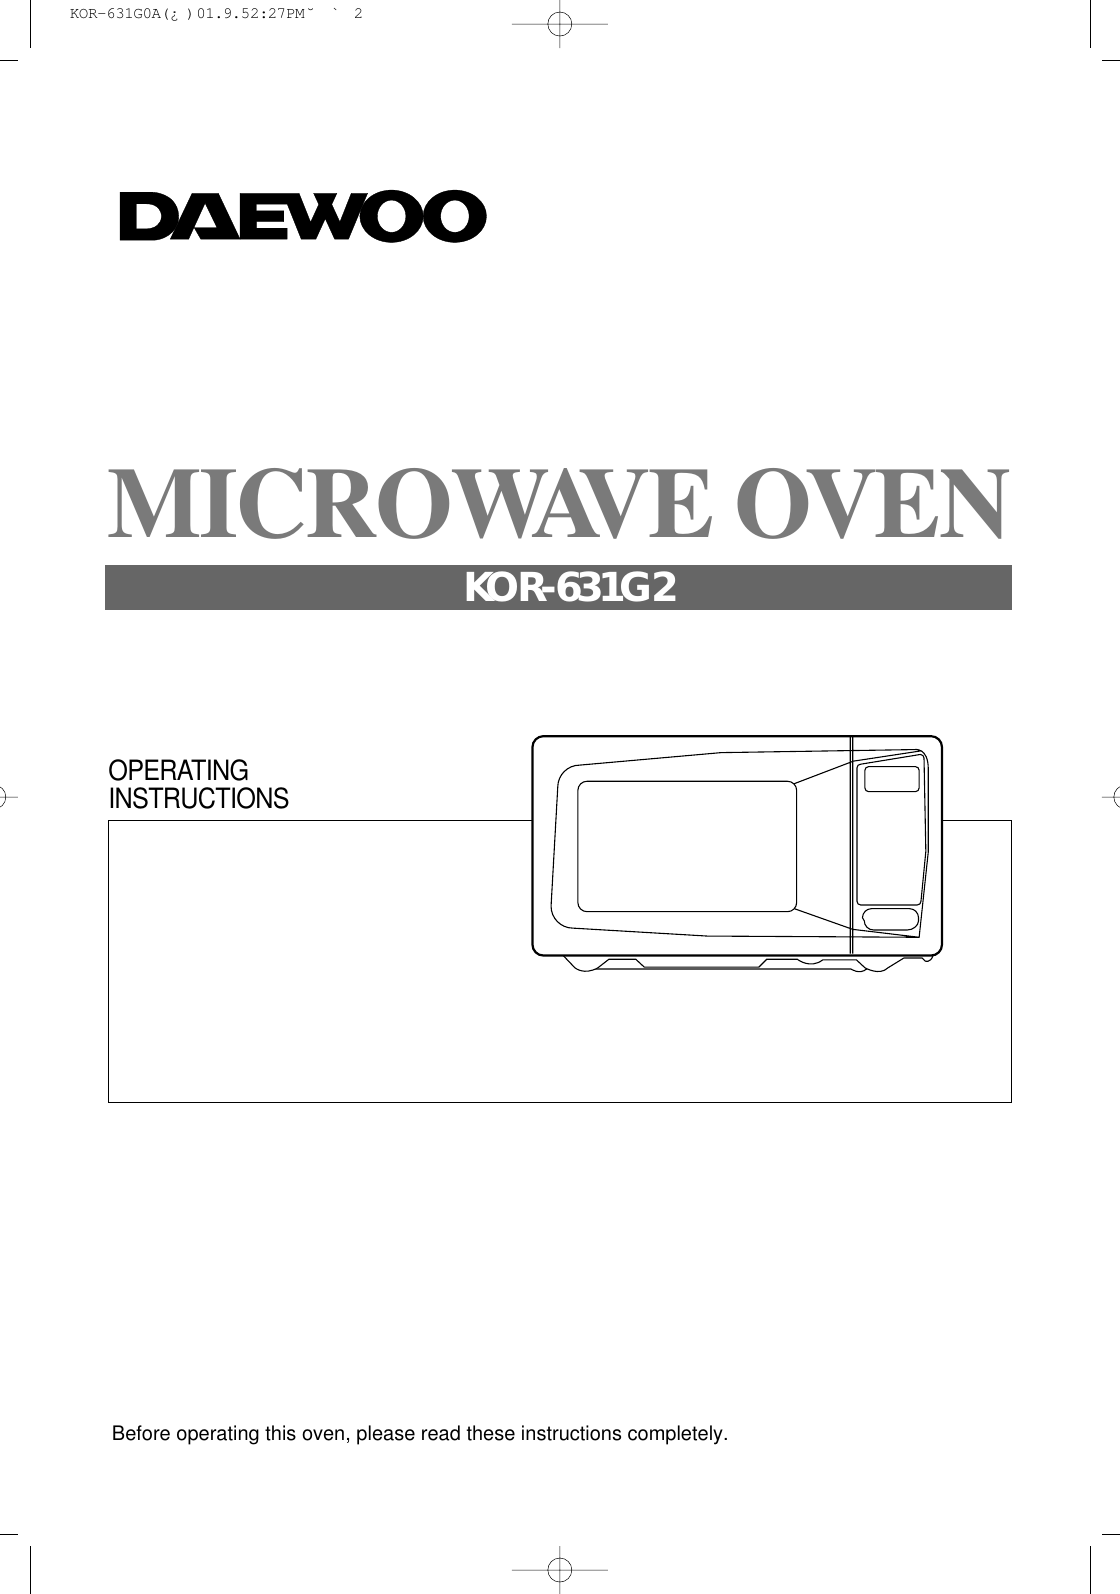 Before operating this oven, please read these instructions completely.OPERATINGINSTRUCTIONSMICROWAVE OVENKOR-631G2 KOR-631G0A(¿ )  01.9.5 2:27 PM  ˘`2